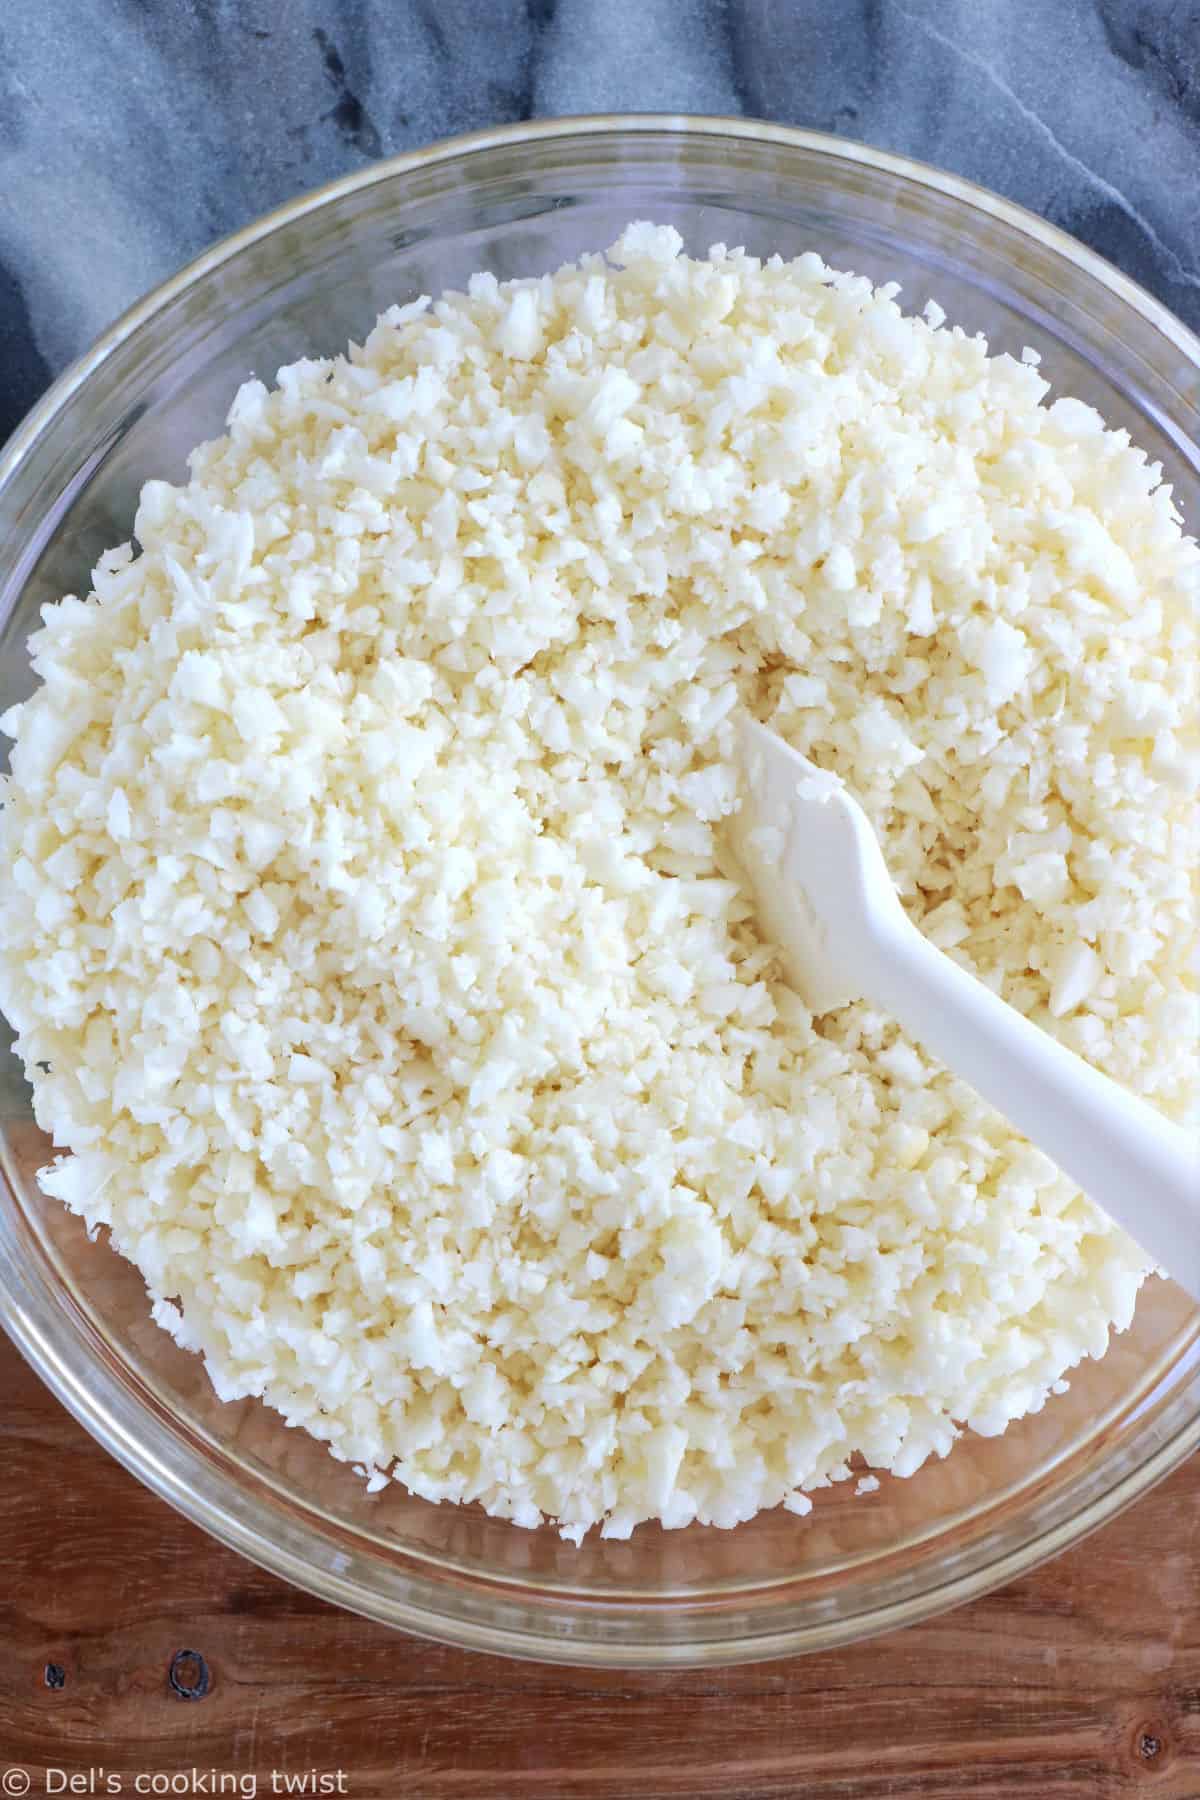 Learn how to make cauliflower rice from scratch, following an easy step-by-step guide. Quick to prepare and healthy, this grain-free and low carb recipe is life changing.